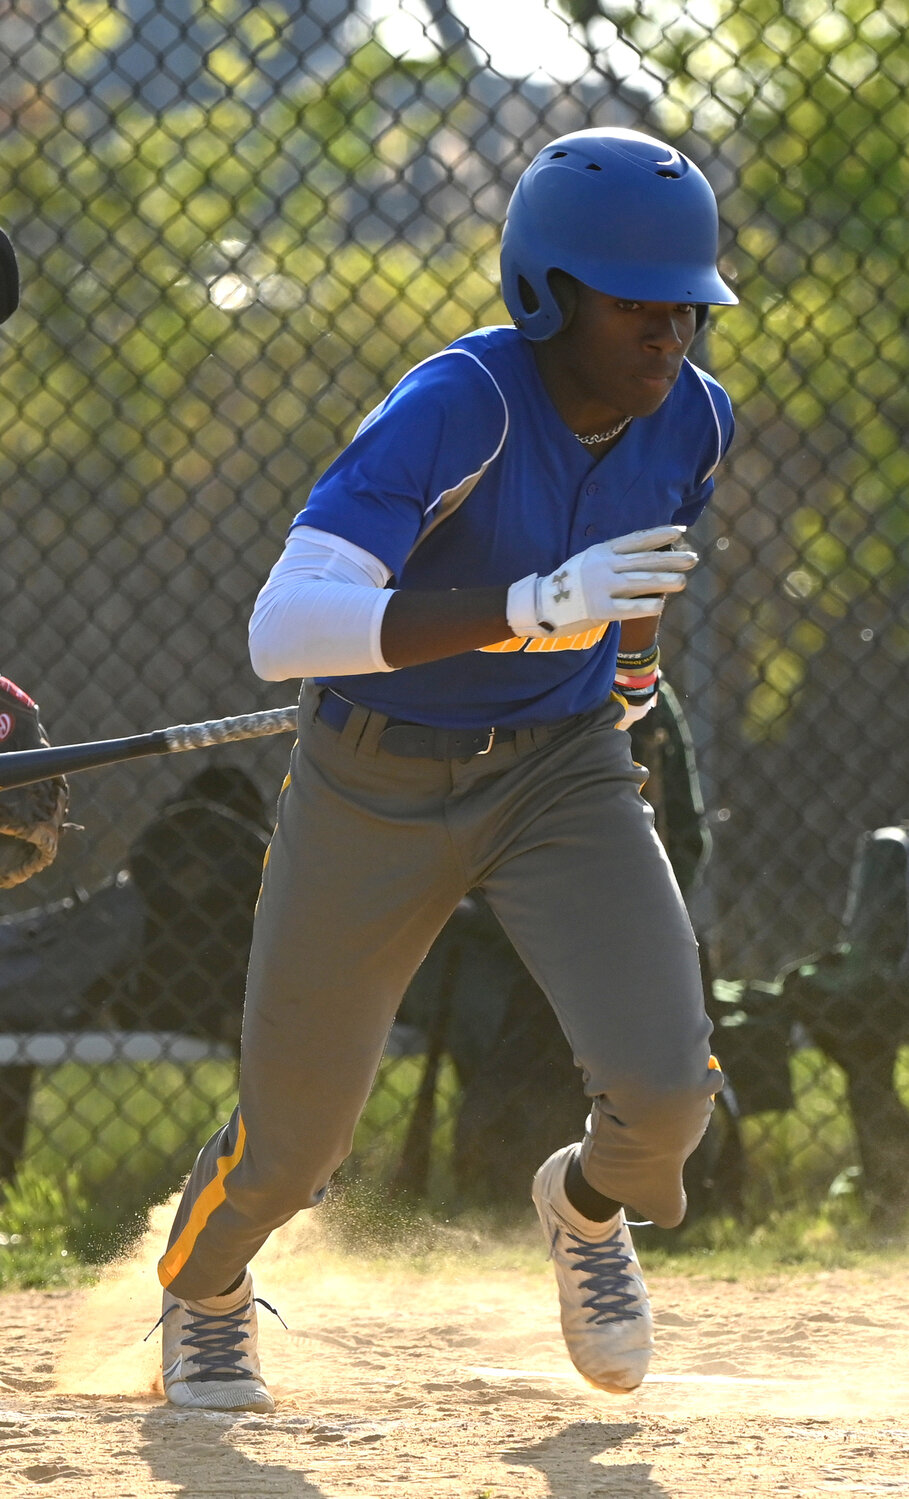 Junior Zaire Galloway serves as Lawrence’s No. 1 pitcher, center fielder and leadoff batter in its return to the diamond.